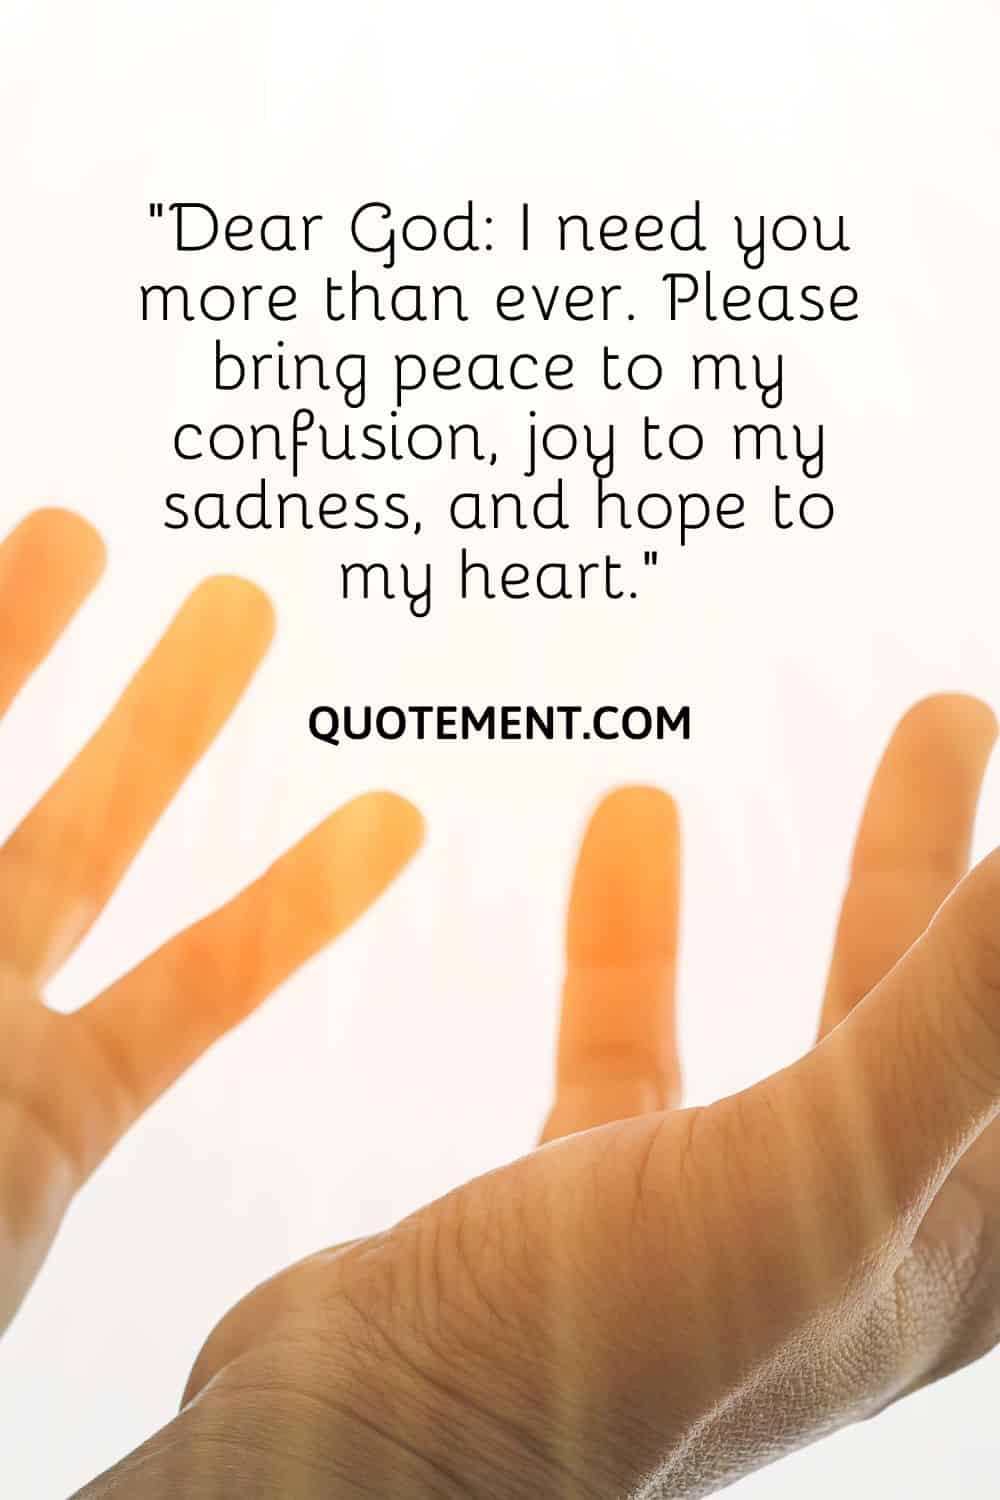 “Dear God I need you more than ever. Please bring peace to my confusion, joy to my sadness, and hope to my heart.”